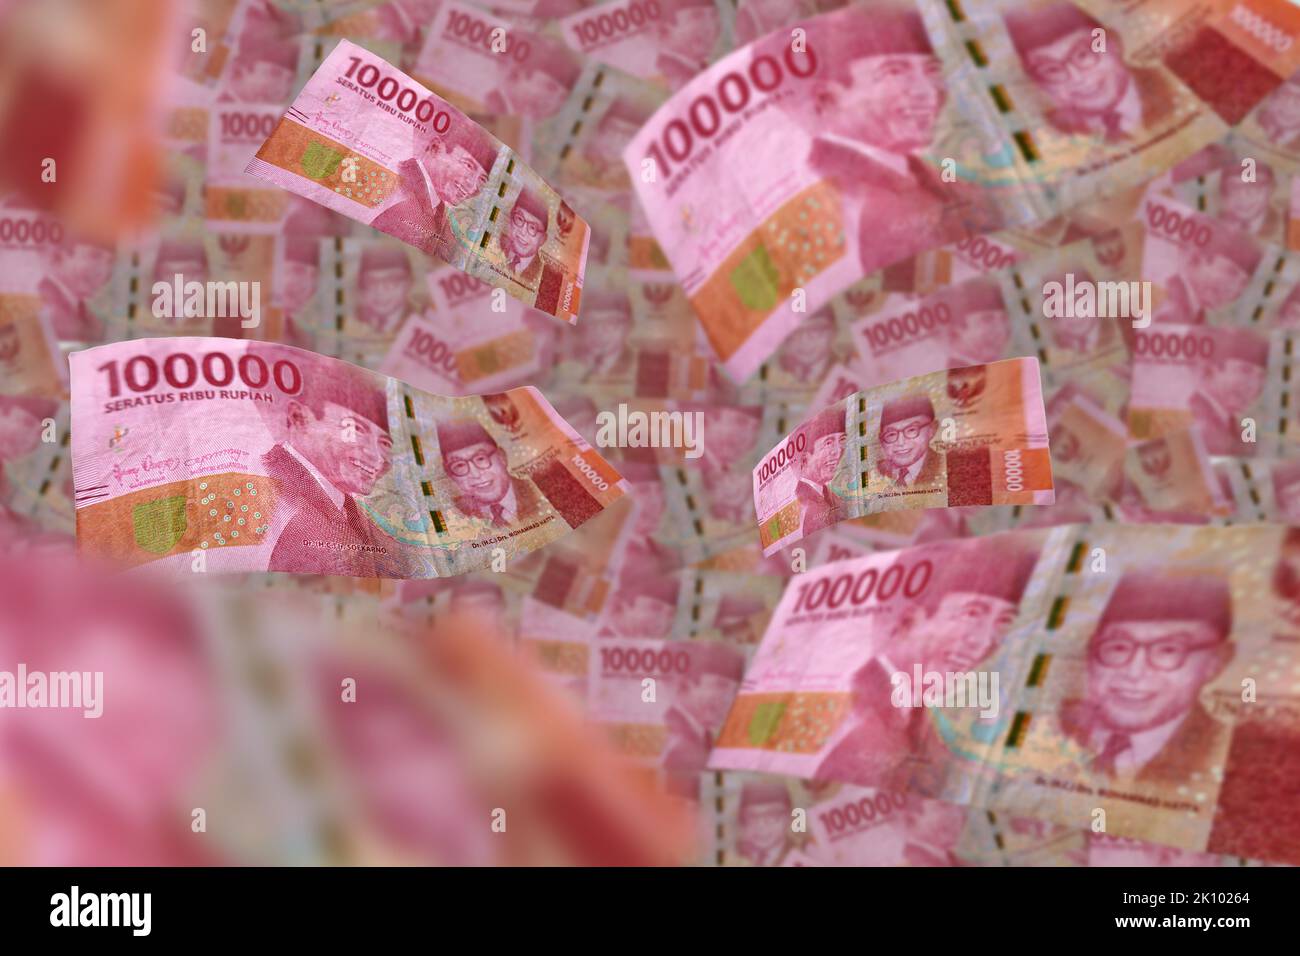 Flying 100,000 rupiah banknote isolated on rupiah background Stock Photo